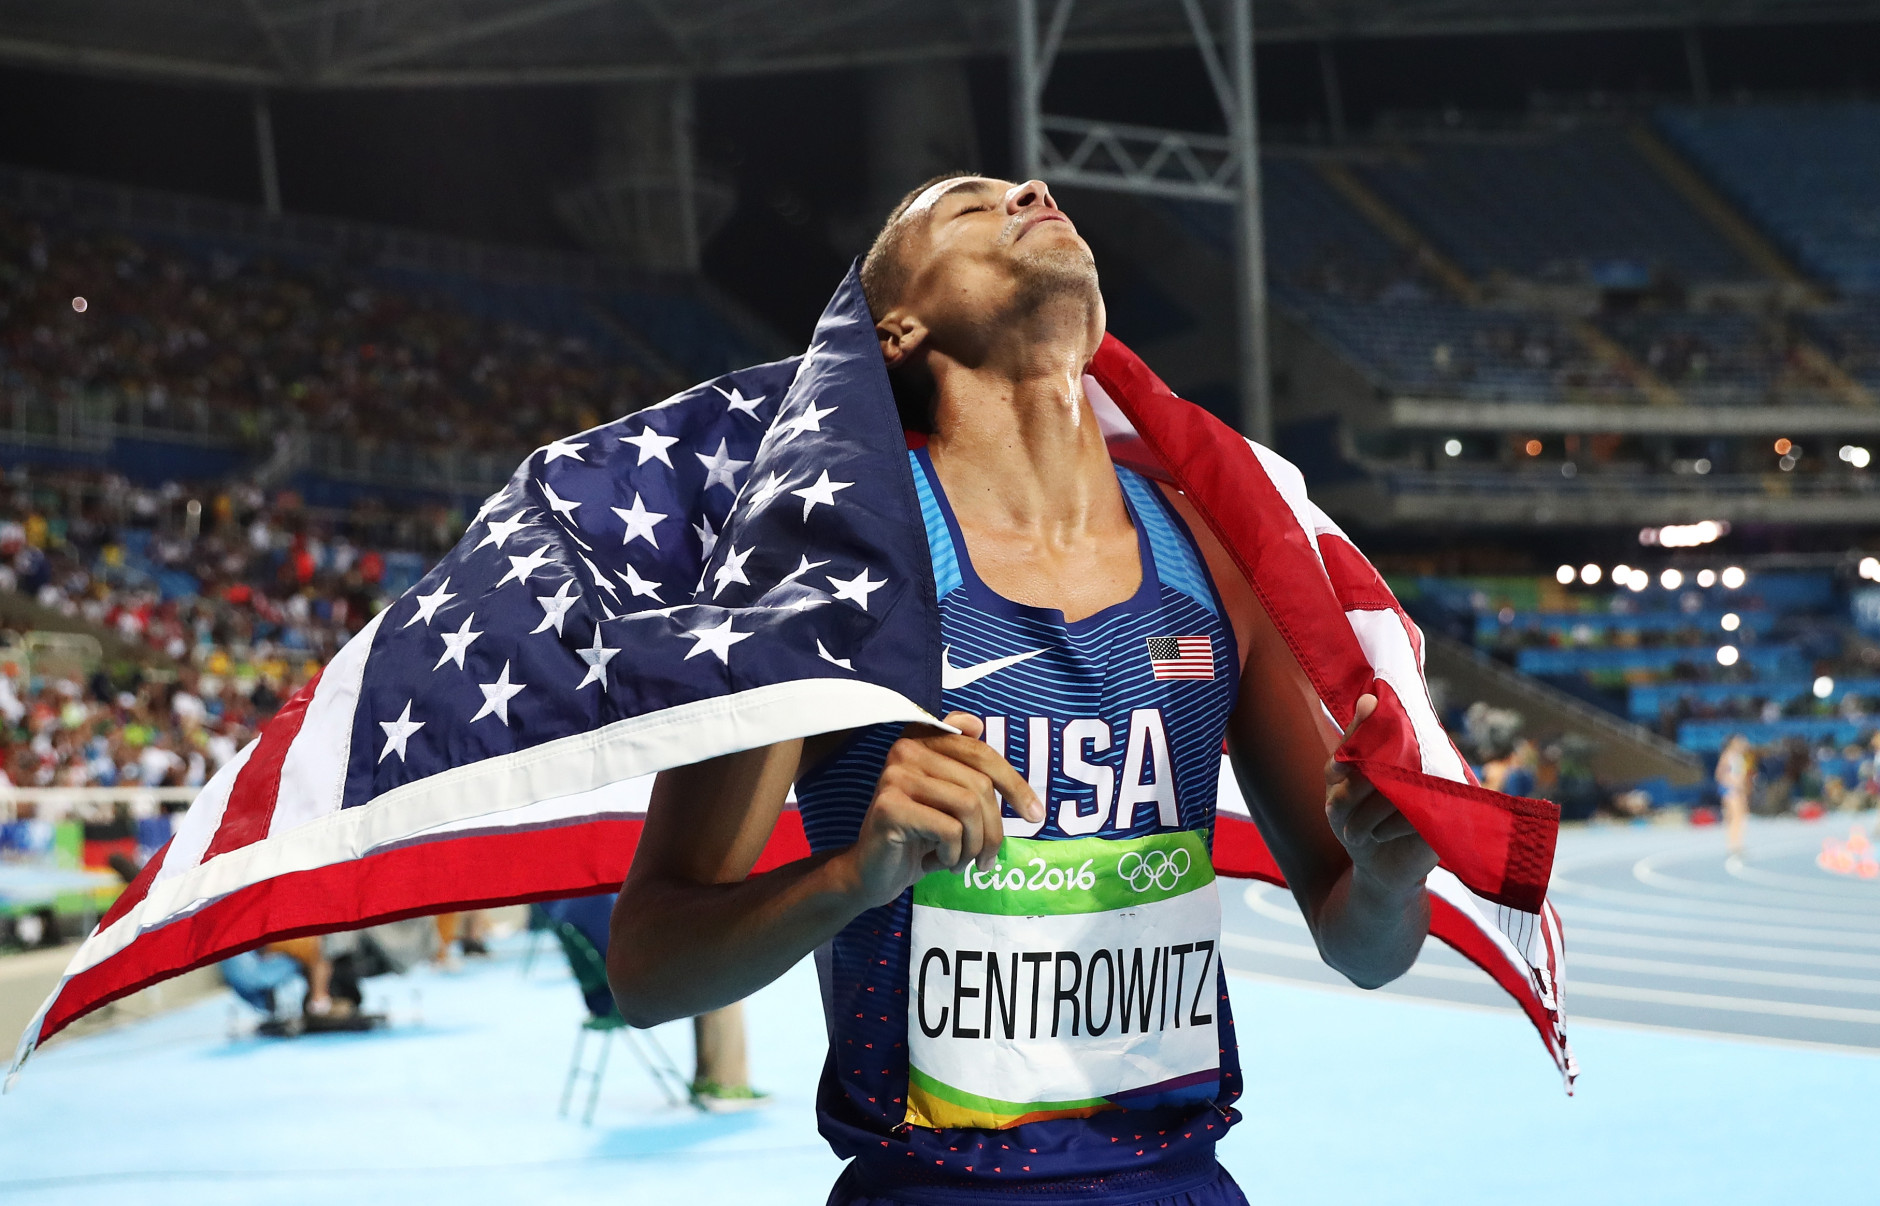 RIO DE JANEIRO, BRAZIL - AUGUST 20:  Matthew Centrowitz of the United States celebrates after winning gold in the Men's 1500 meter Final on Day 15 of the Rio 2016 Olympic Games at the Olympic Stadium on August 20, 2016 in Rio de Janeiro, Brazil.  (Photo by Ezra Shaw/Getty Images)